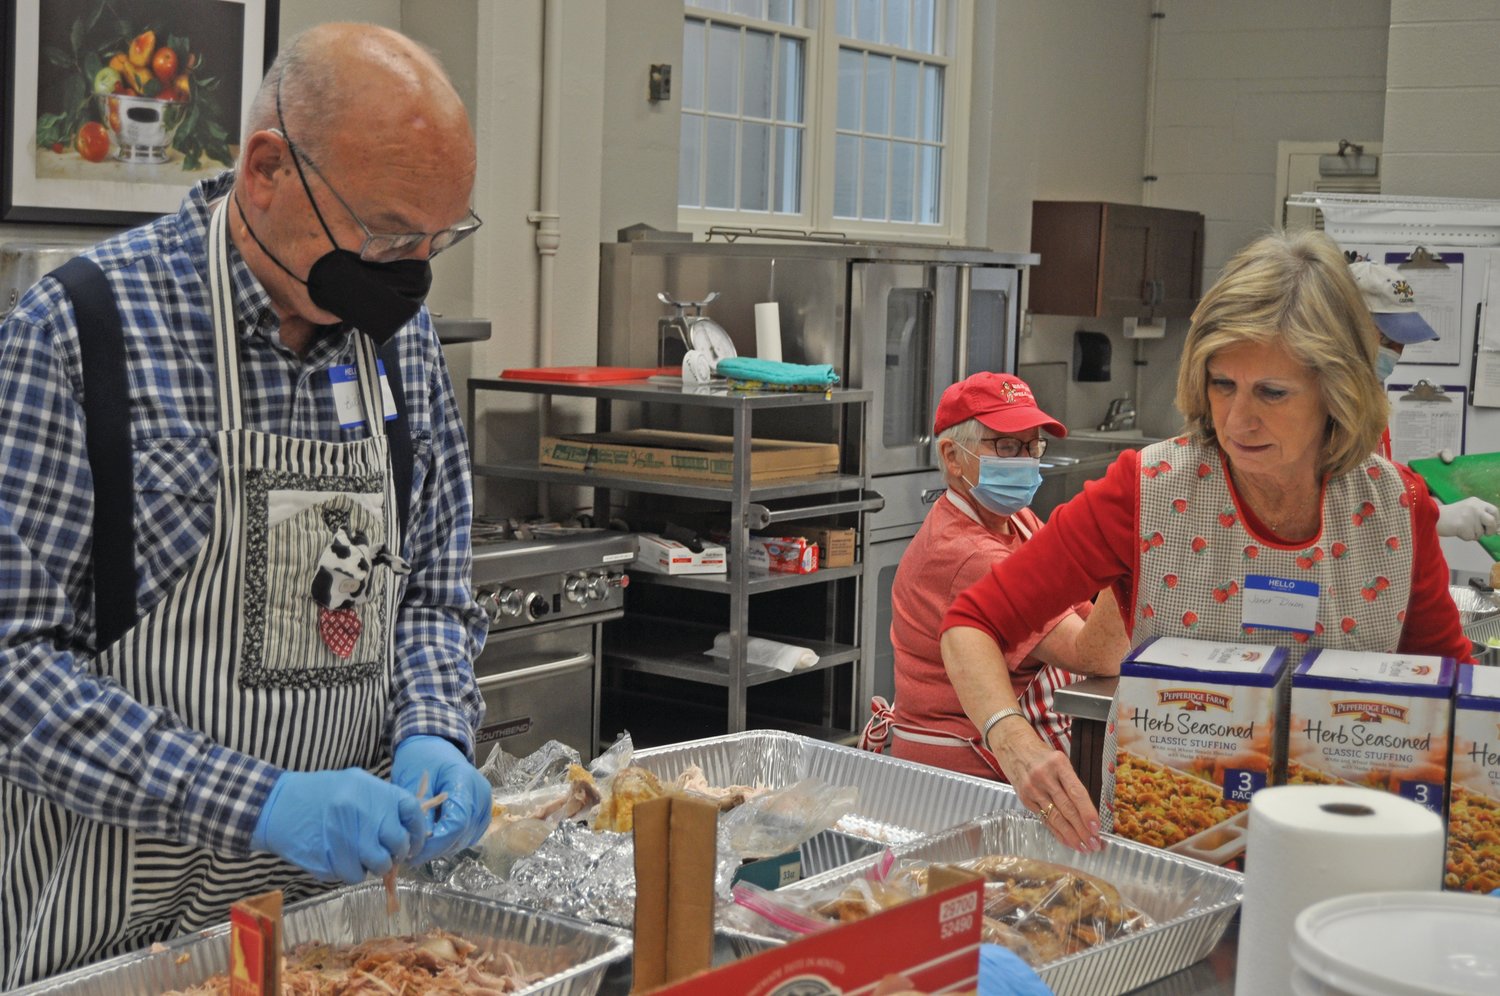 Janet Dixon, right, sets down boxes of stuffing as Bill Doemel prepares a turkey Wednesday during preparations for the Community Thanksgiving Dinner at First United Methodist Church. About 800 people had signed up for a delivered meal and 250-300 people were expected to dine in for the annual tradition.